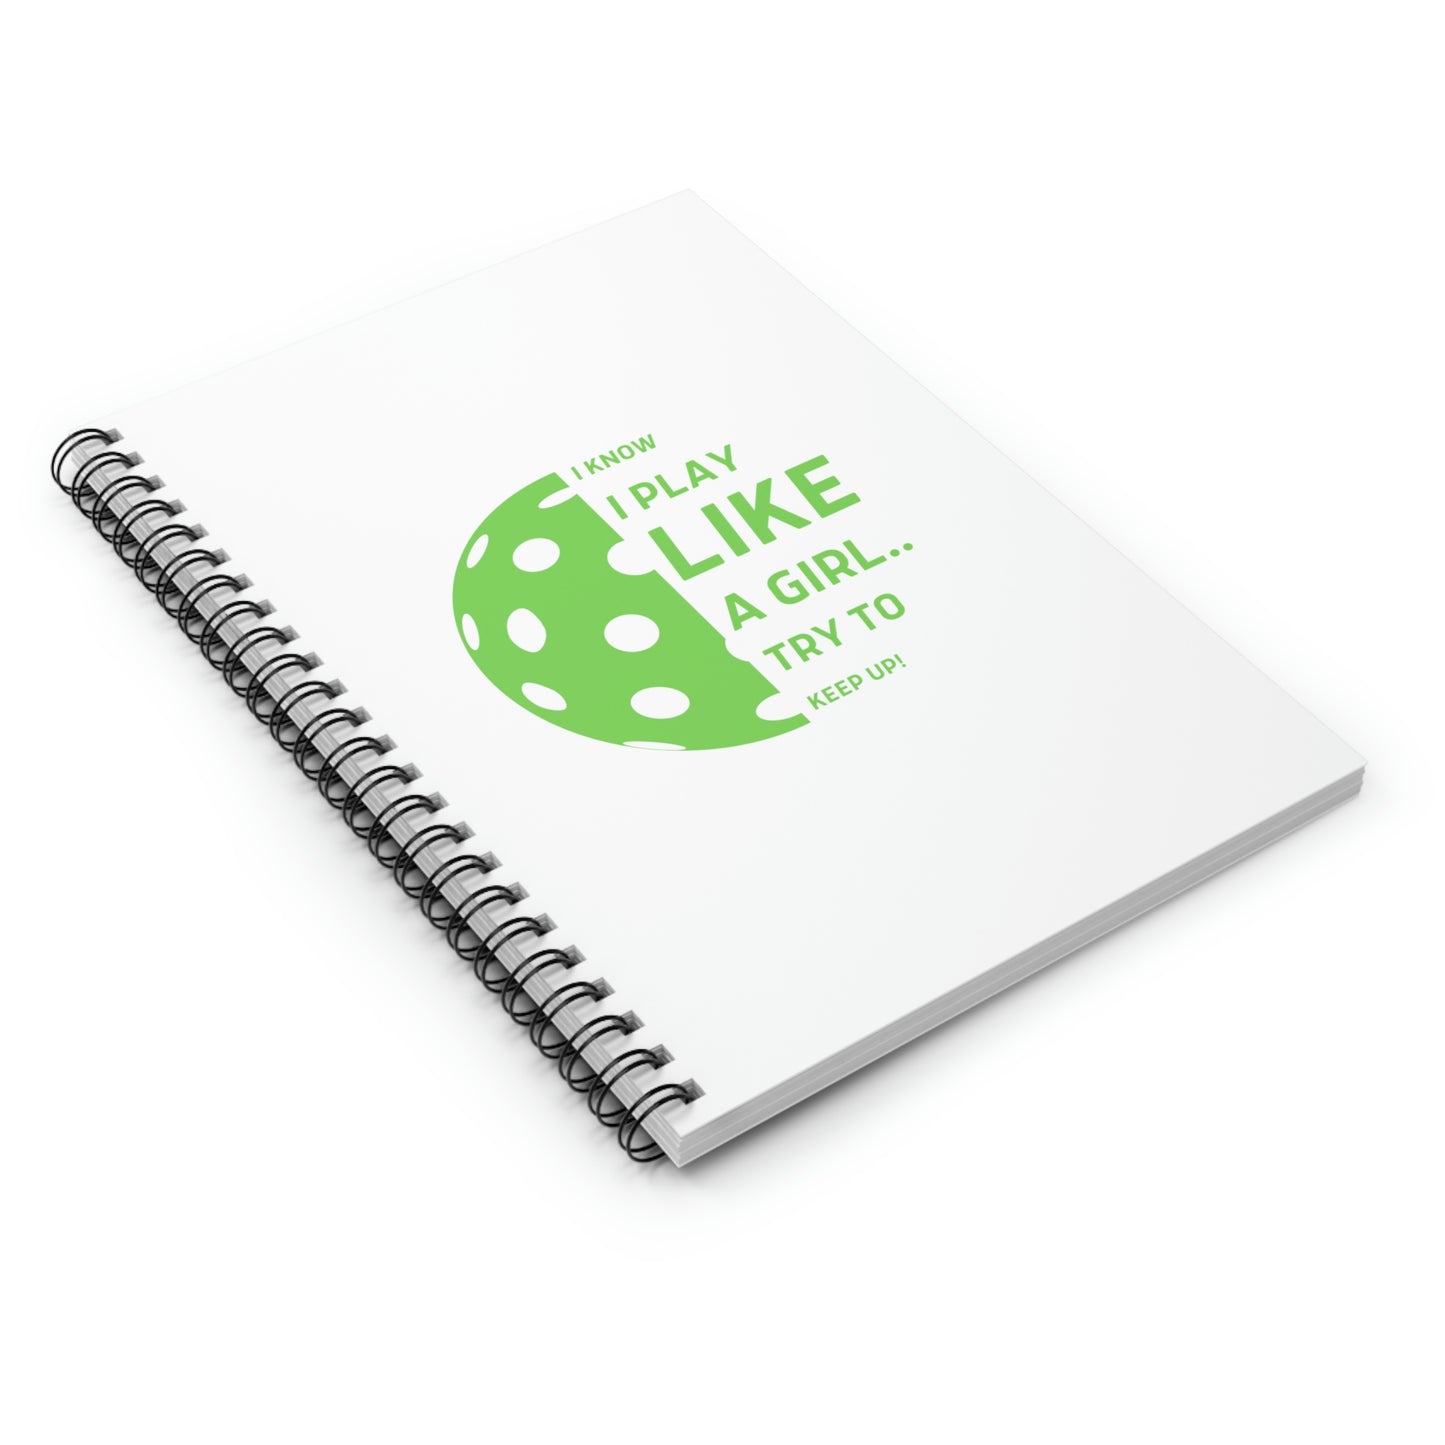 Spiral Notebook - Ruled Line  (Green Graphic)